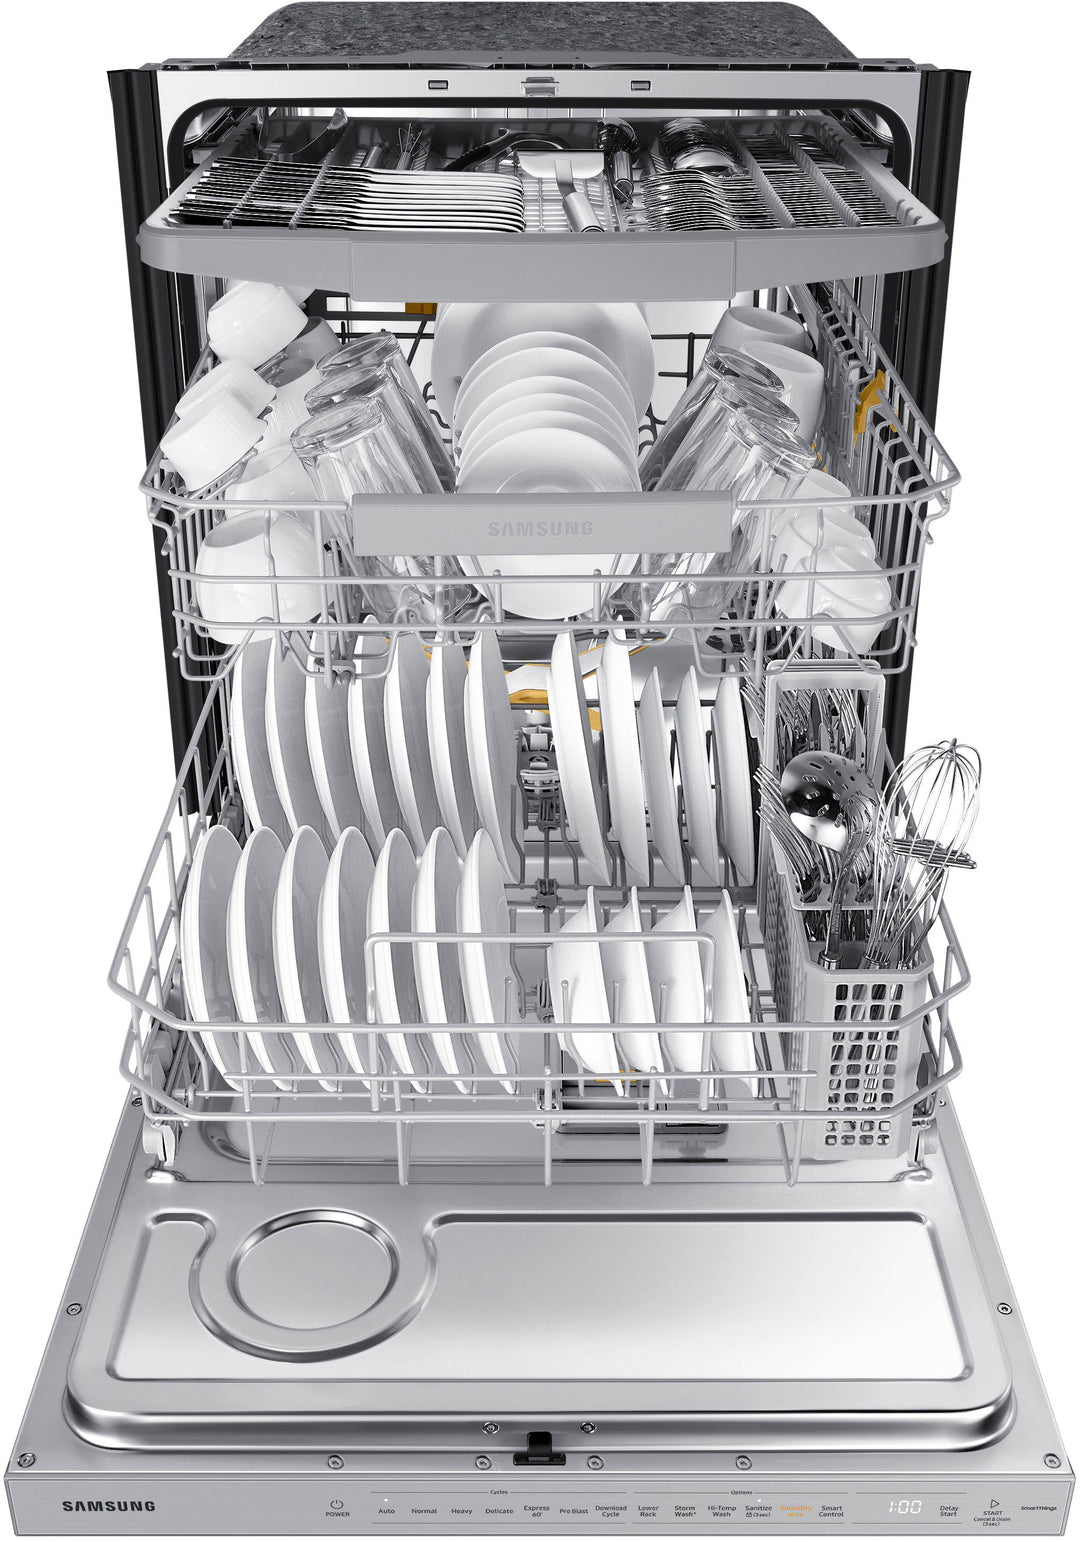 Samsung - Smart 42dBA Dishwasher with StormWash+ and Smart Dry - Stainless steel_9